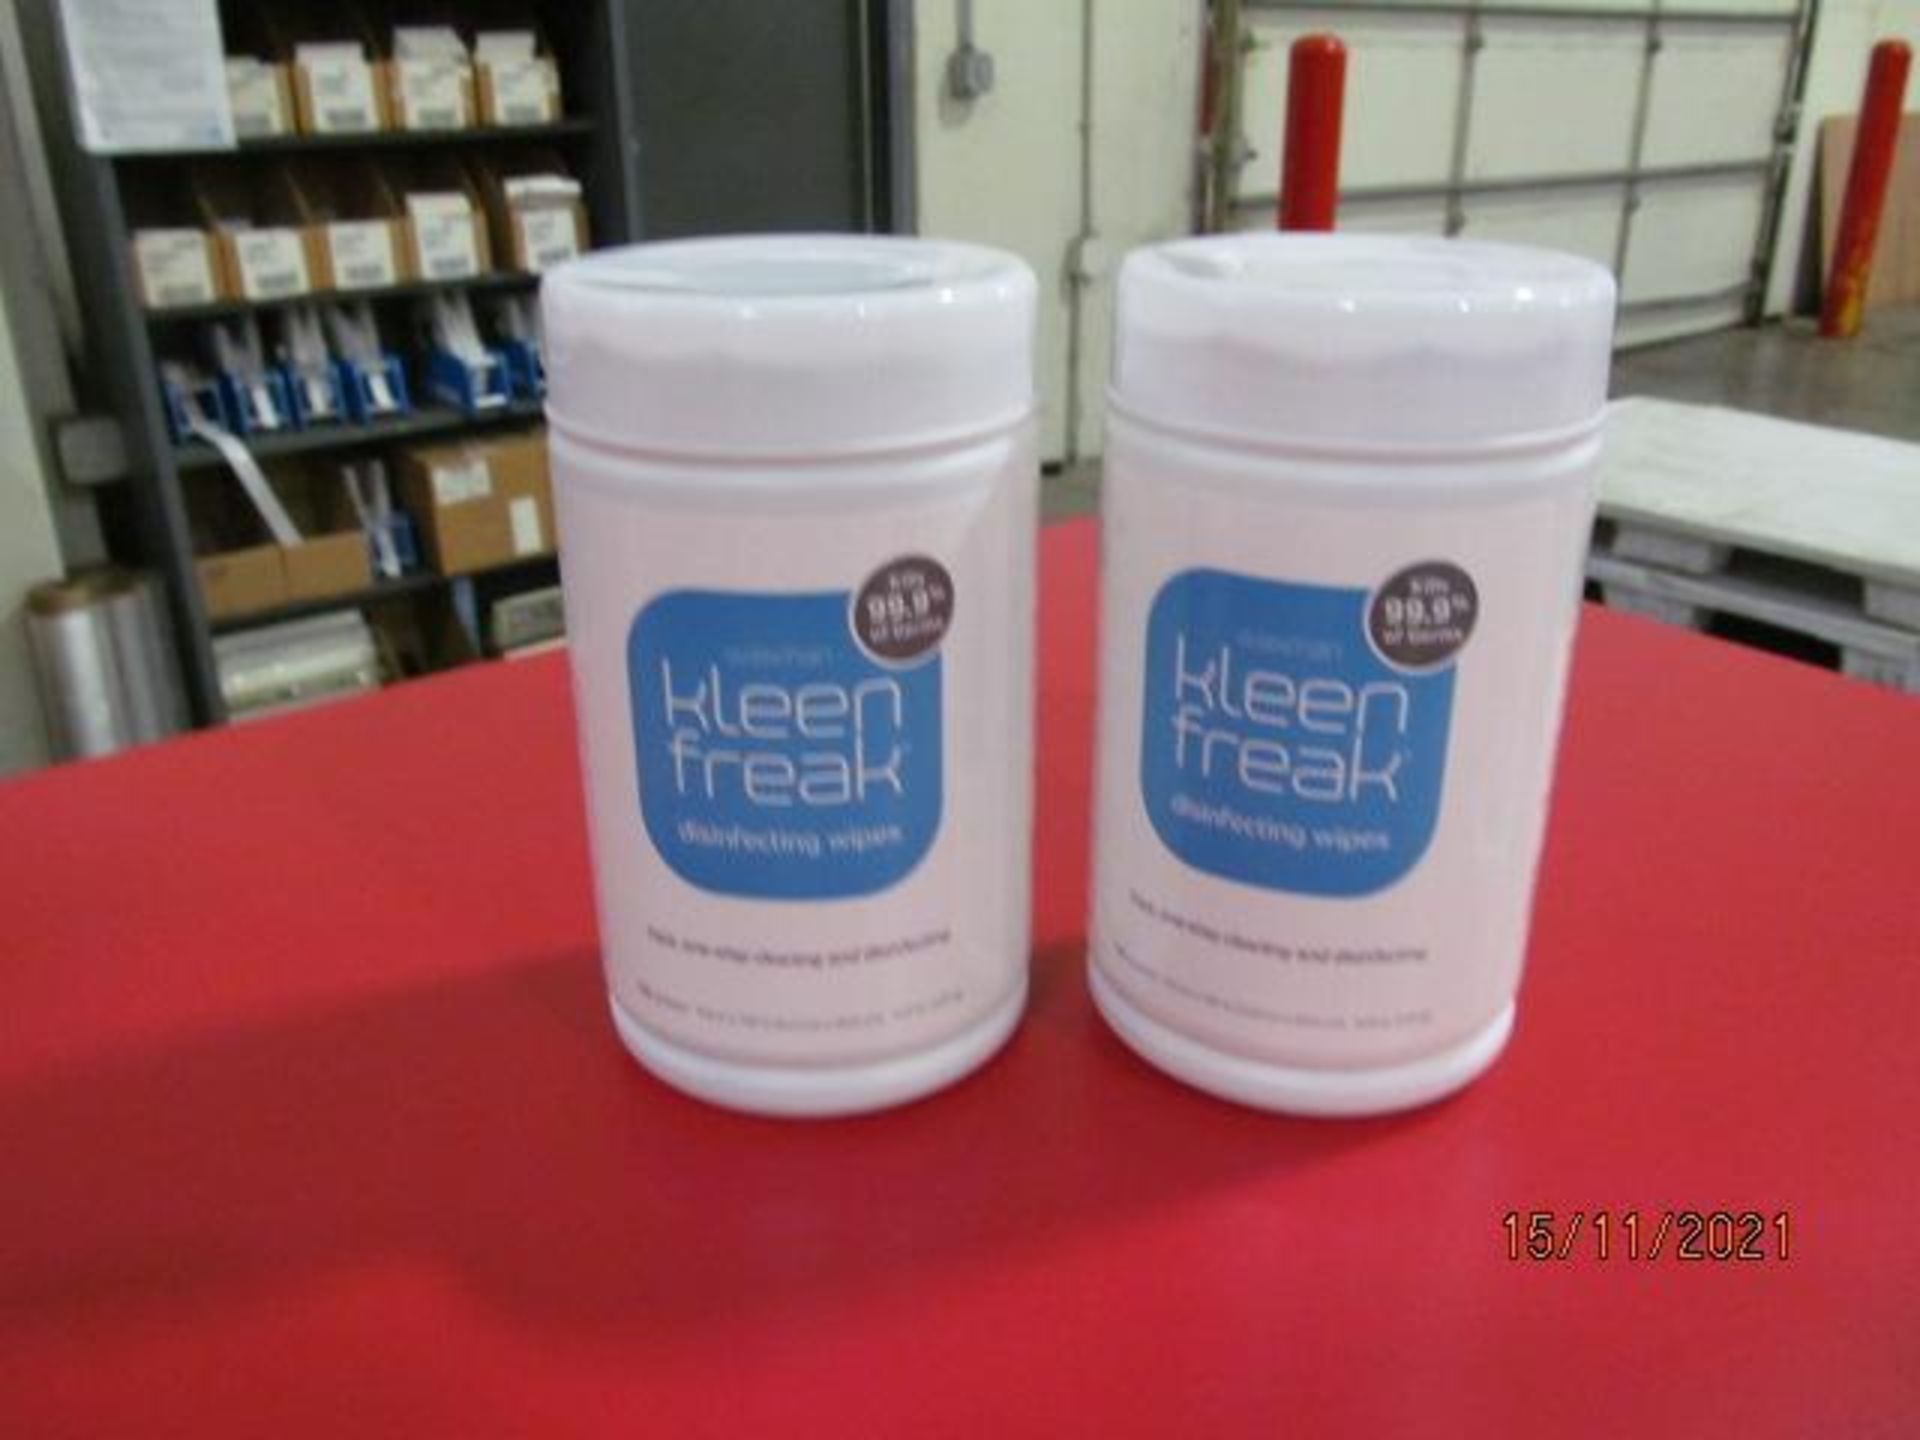 Lot of Waxman Kleen Freak Sanitizing Wipes consisting of 29,027 packages on 45 pallets. Each package - Image 4 of 11